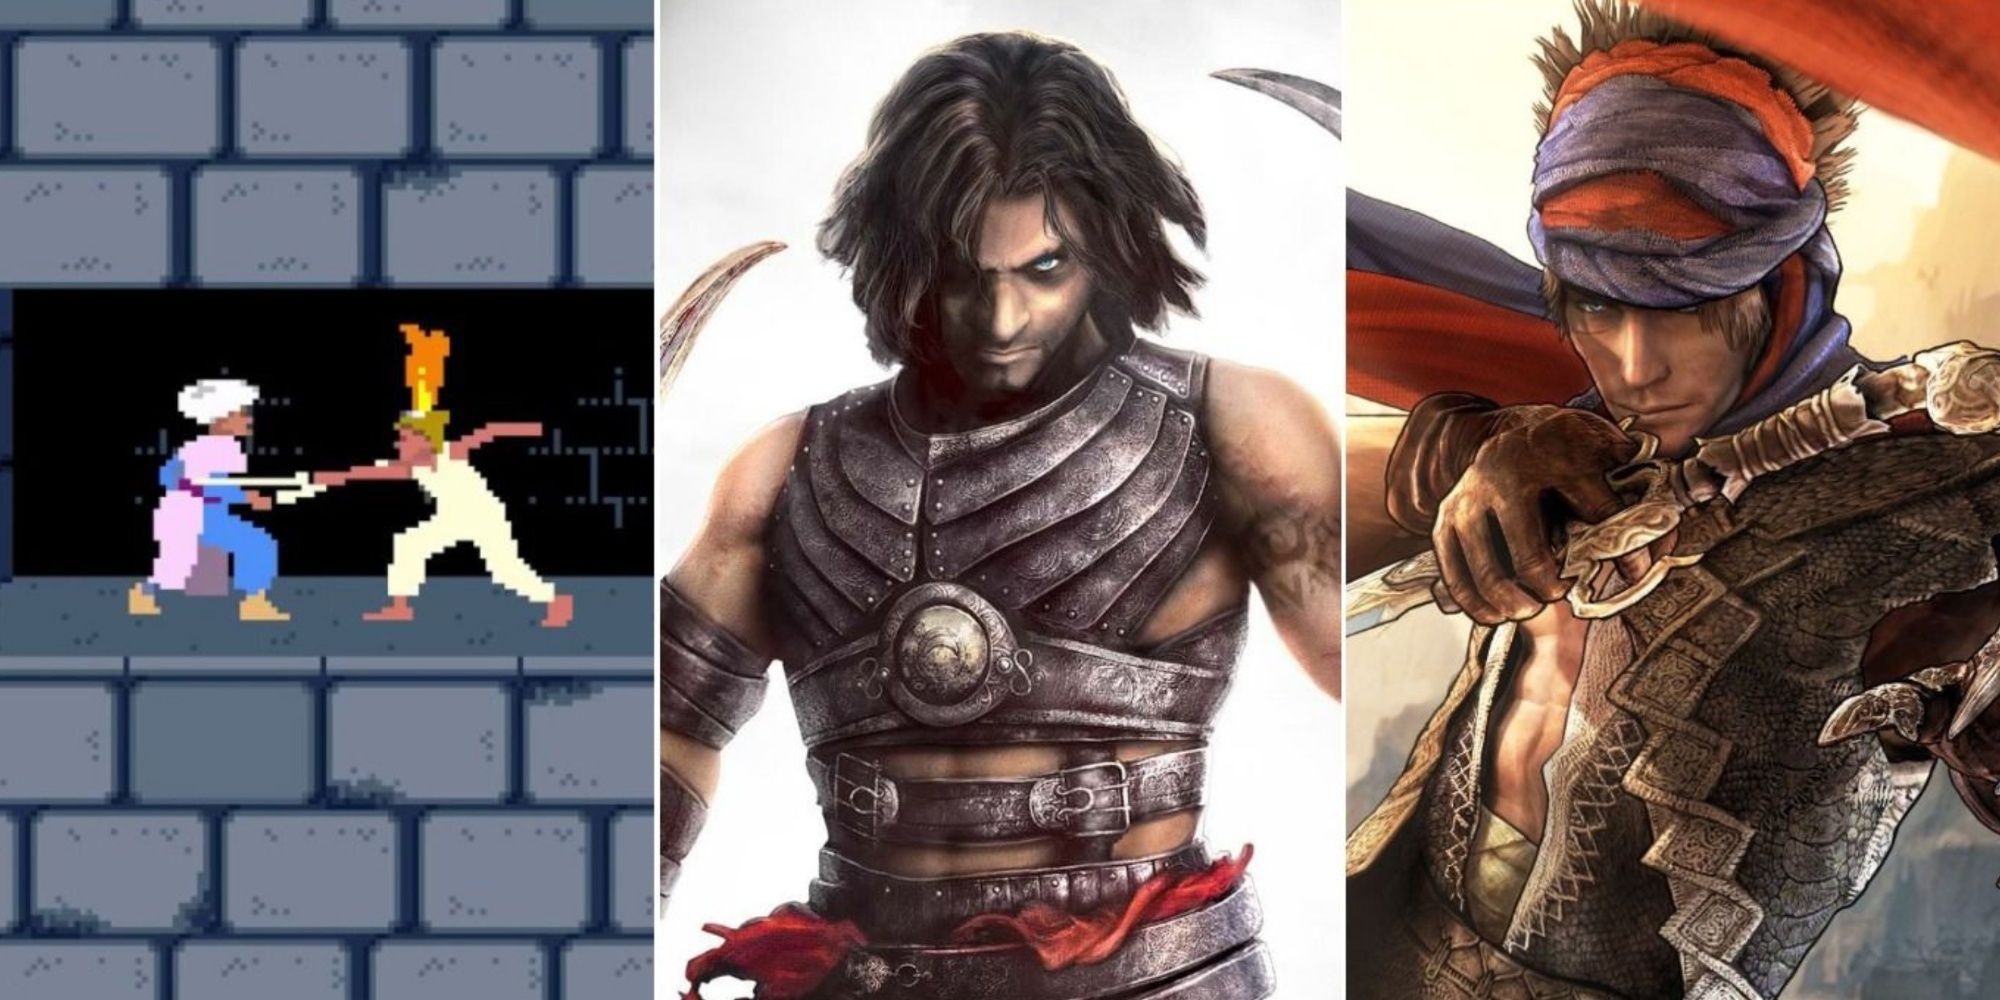 All Of The Prince Of Persia Games, Ranked featured image with three Persona game screenshots side by side